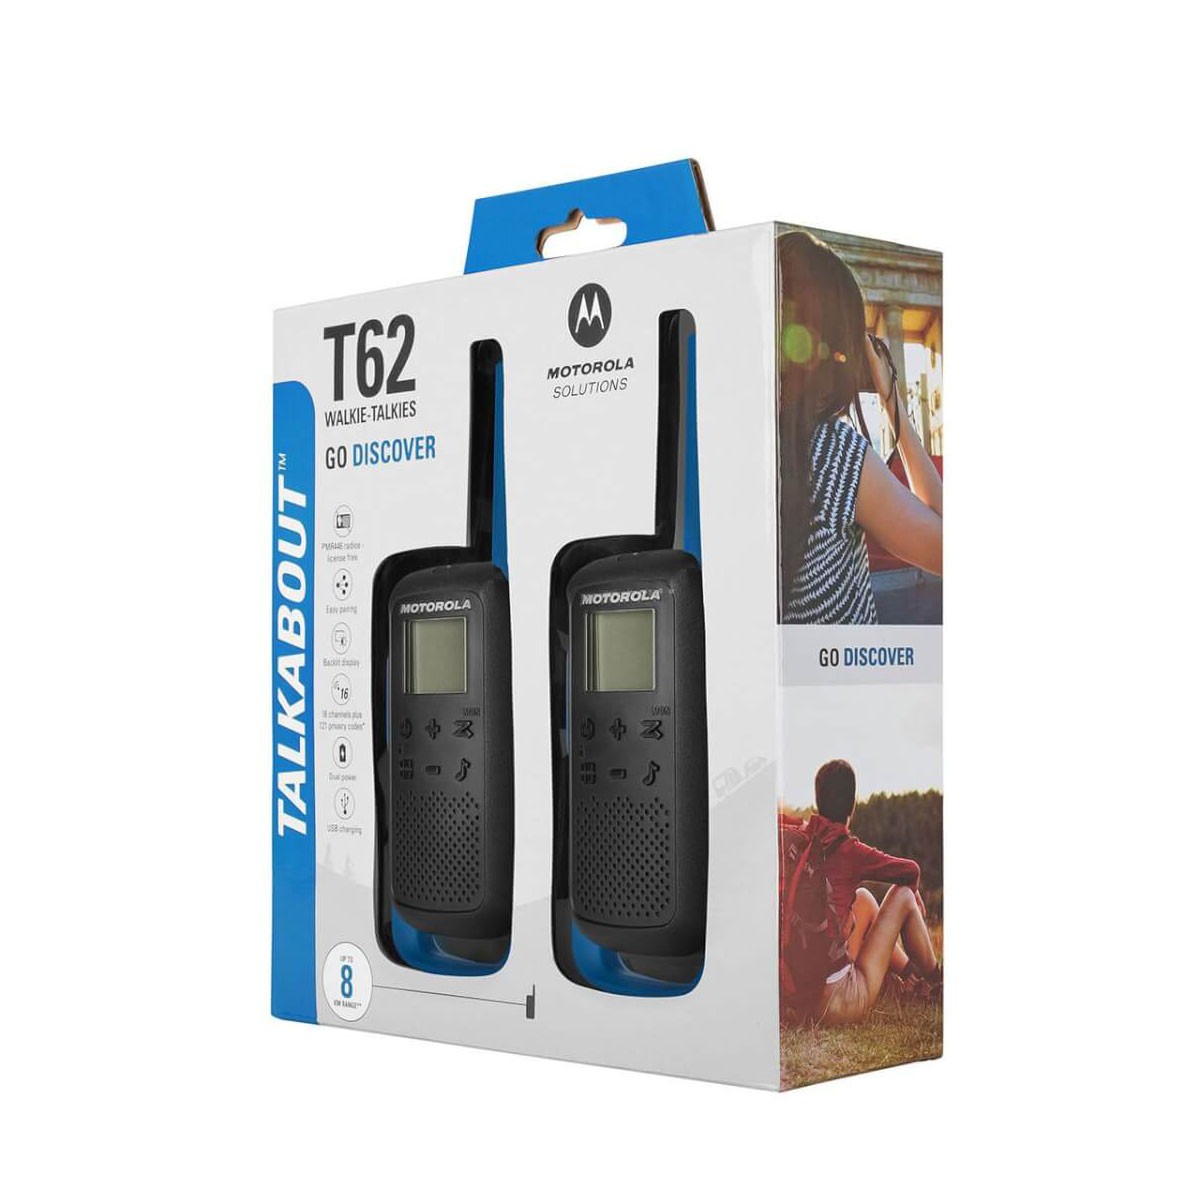 Motorola Talkabout Go Discover T62 twin-pack blue Walkie-Talkie image